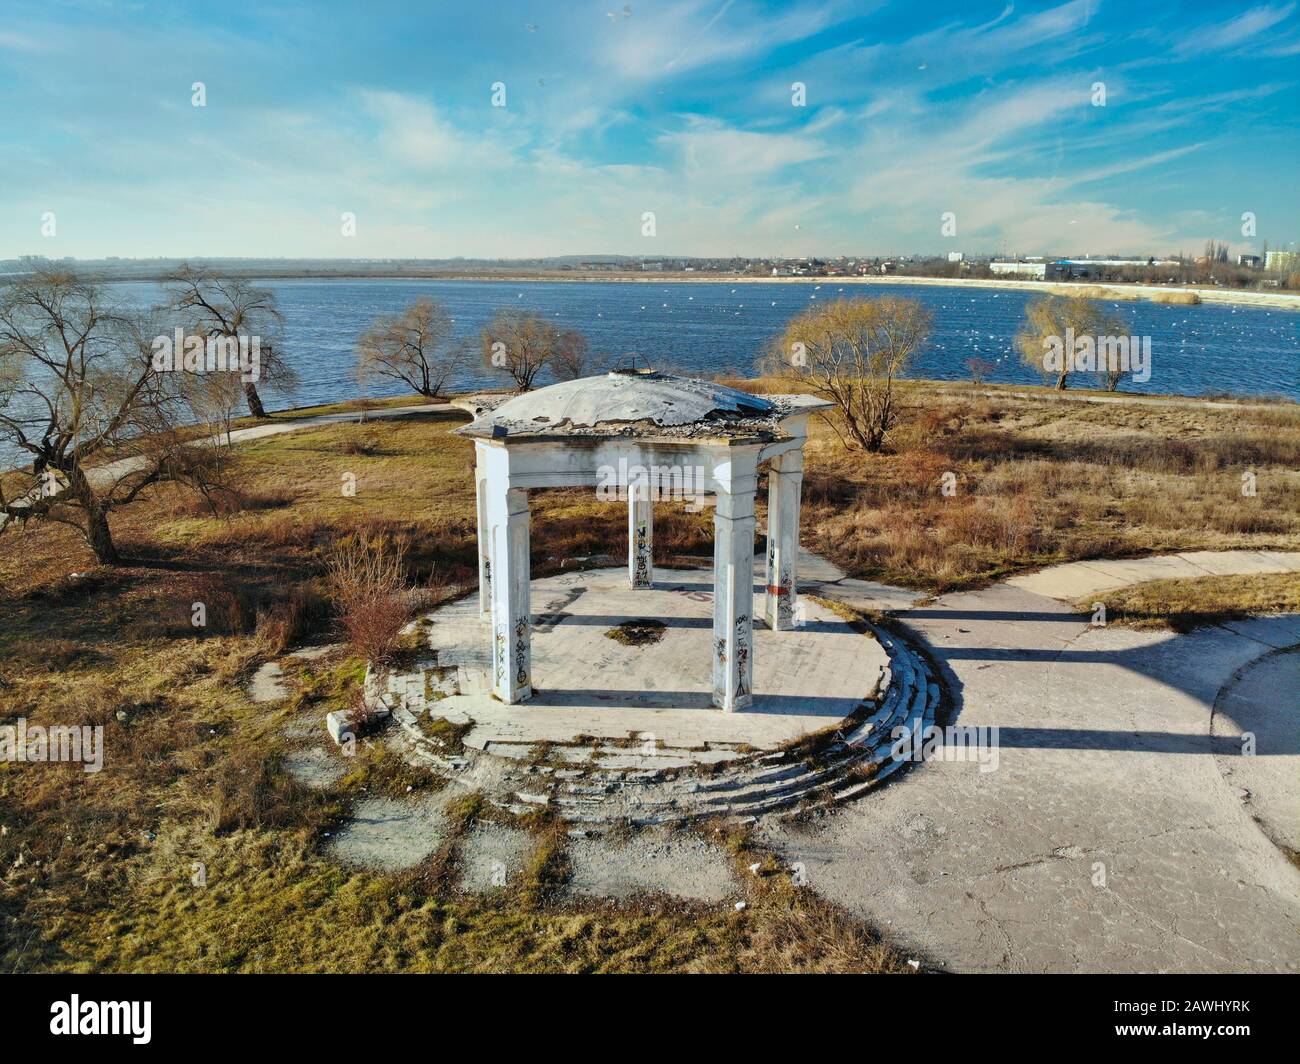 Aerial photo of an old arch at the Morii Lake Island, Bucharest, Romania - 1/31/2020 Stock Photo